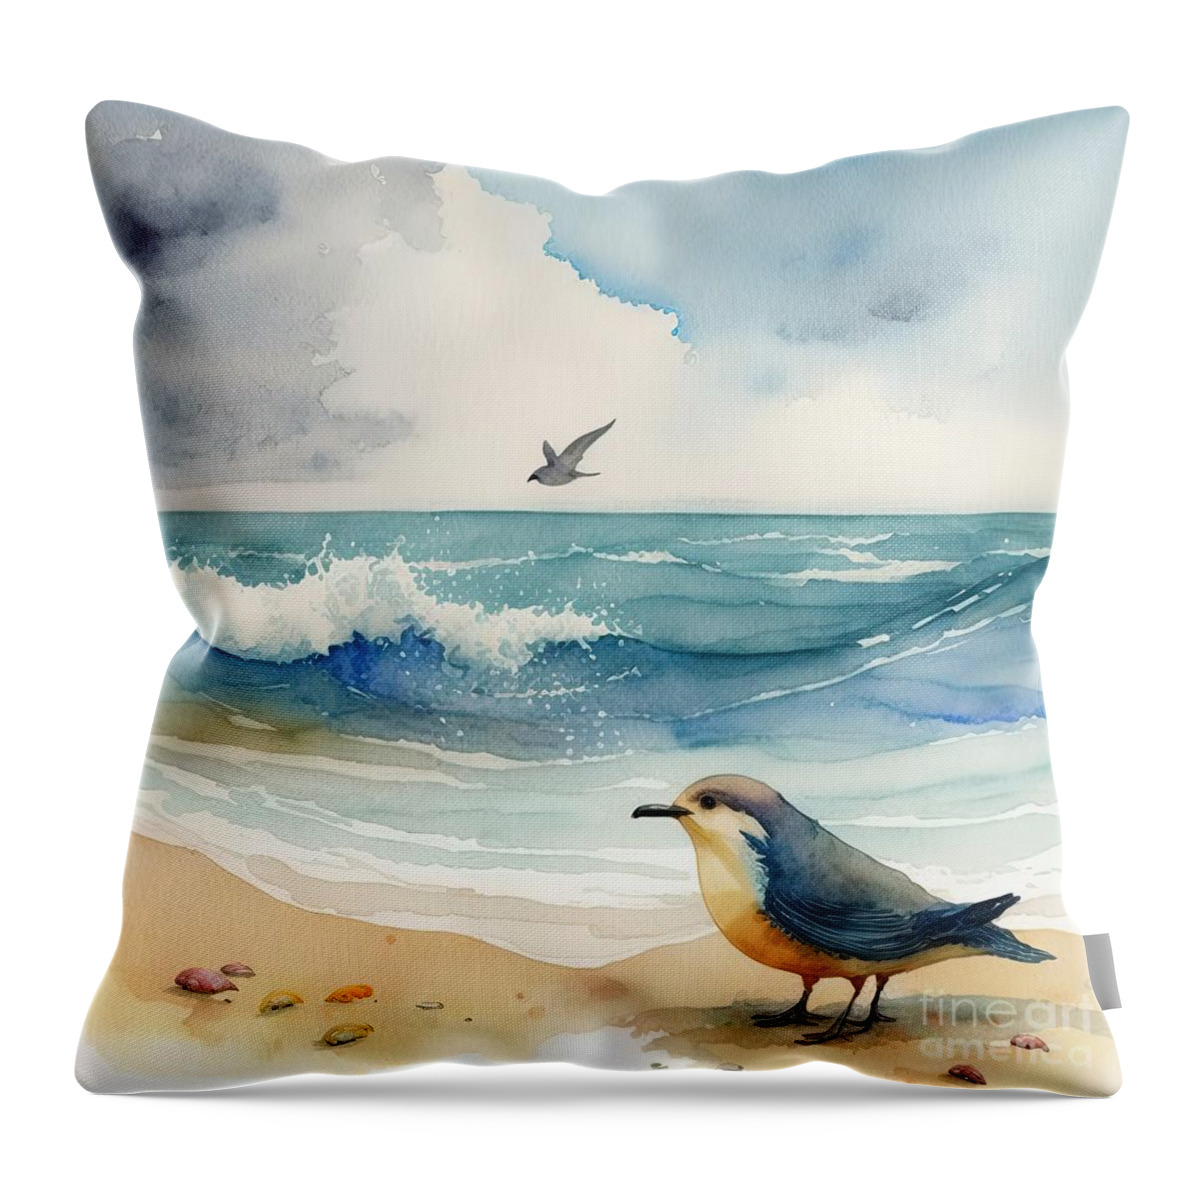 Wild Throw Pillow featuring the painting Bird At Beach by N Akkash